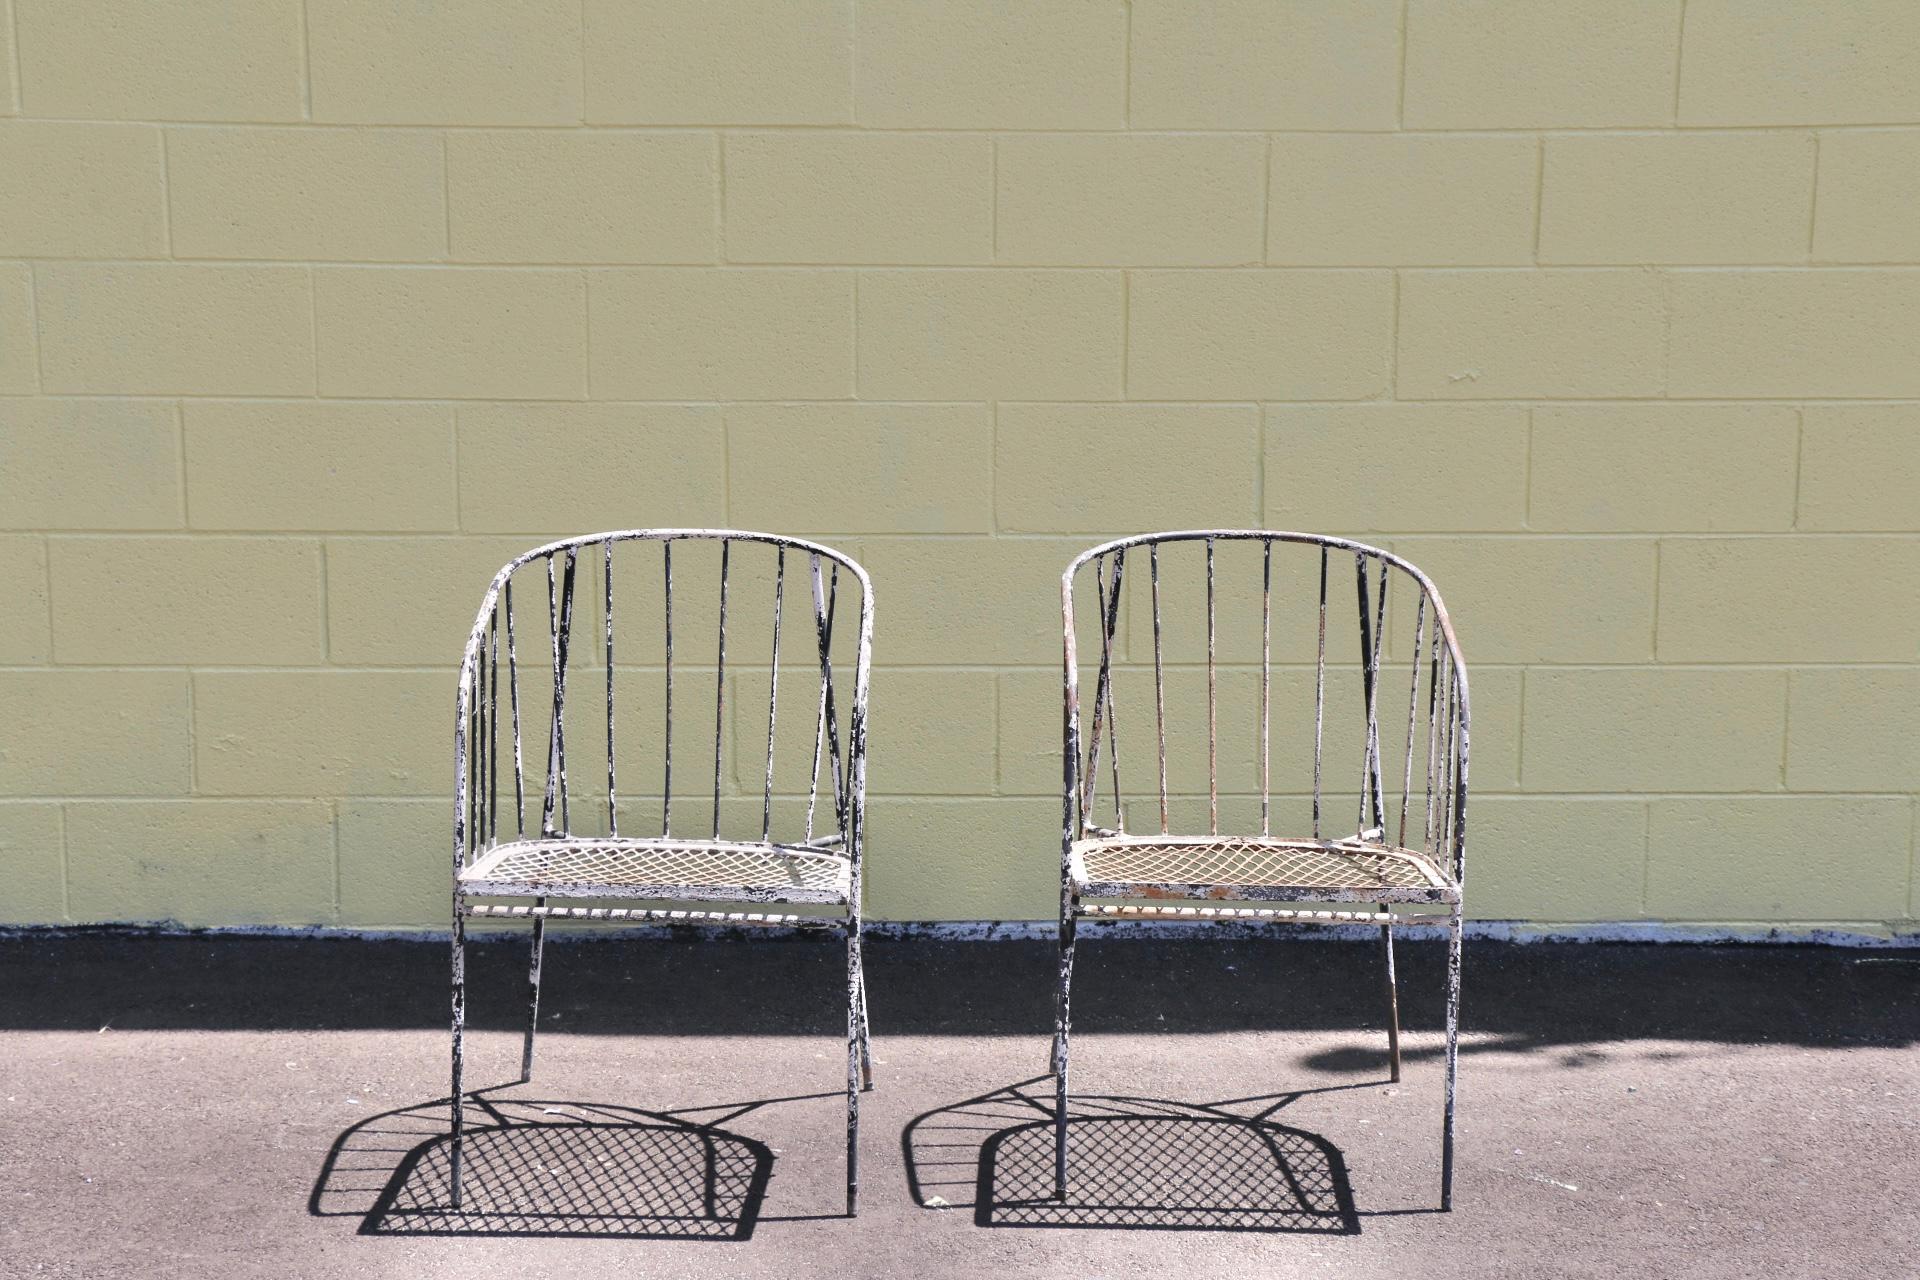 Vintage iron mid century chairs in good rustic condition. Has signs of use. Great design with nice sculptural legs.